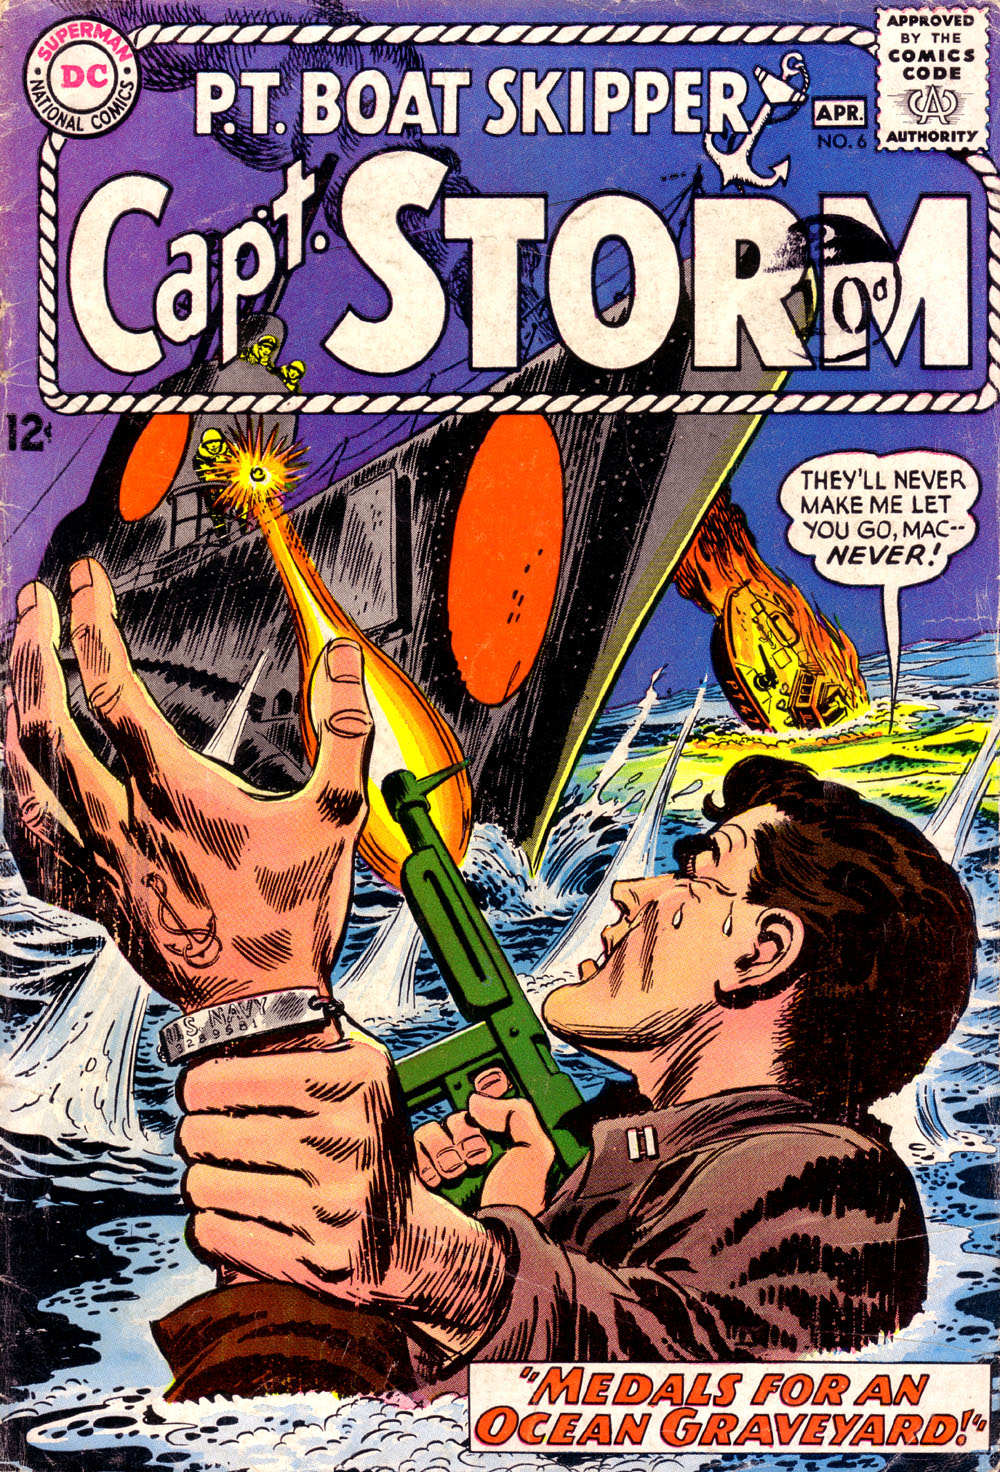 Read online Capt. Storm comic -  Issue #6 - 1